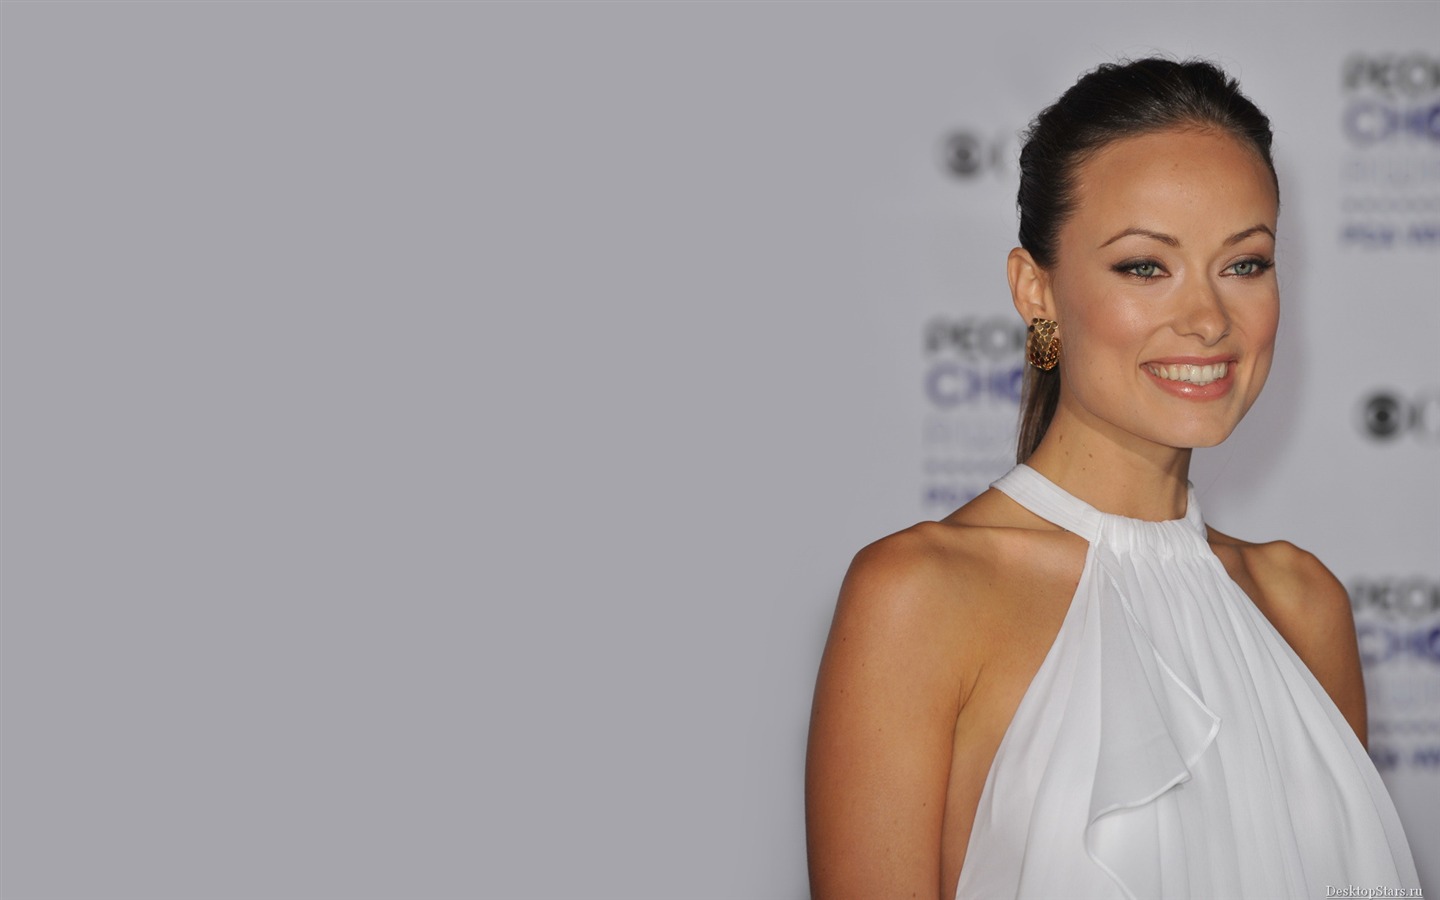 Olivia Wilde #036 - 1440x900 Wallpapers Pictures Photos Images